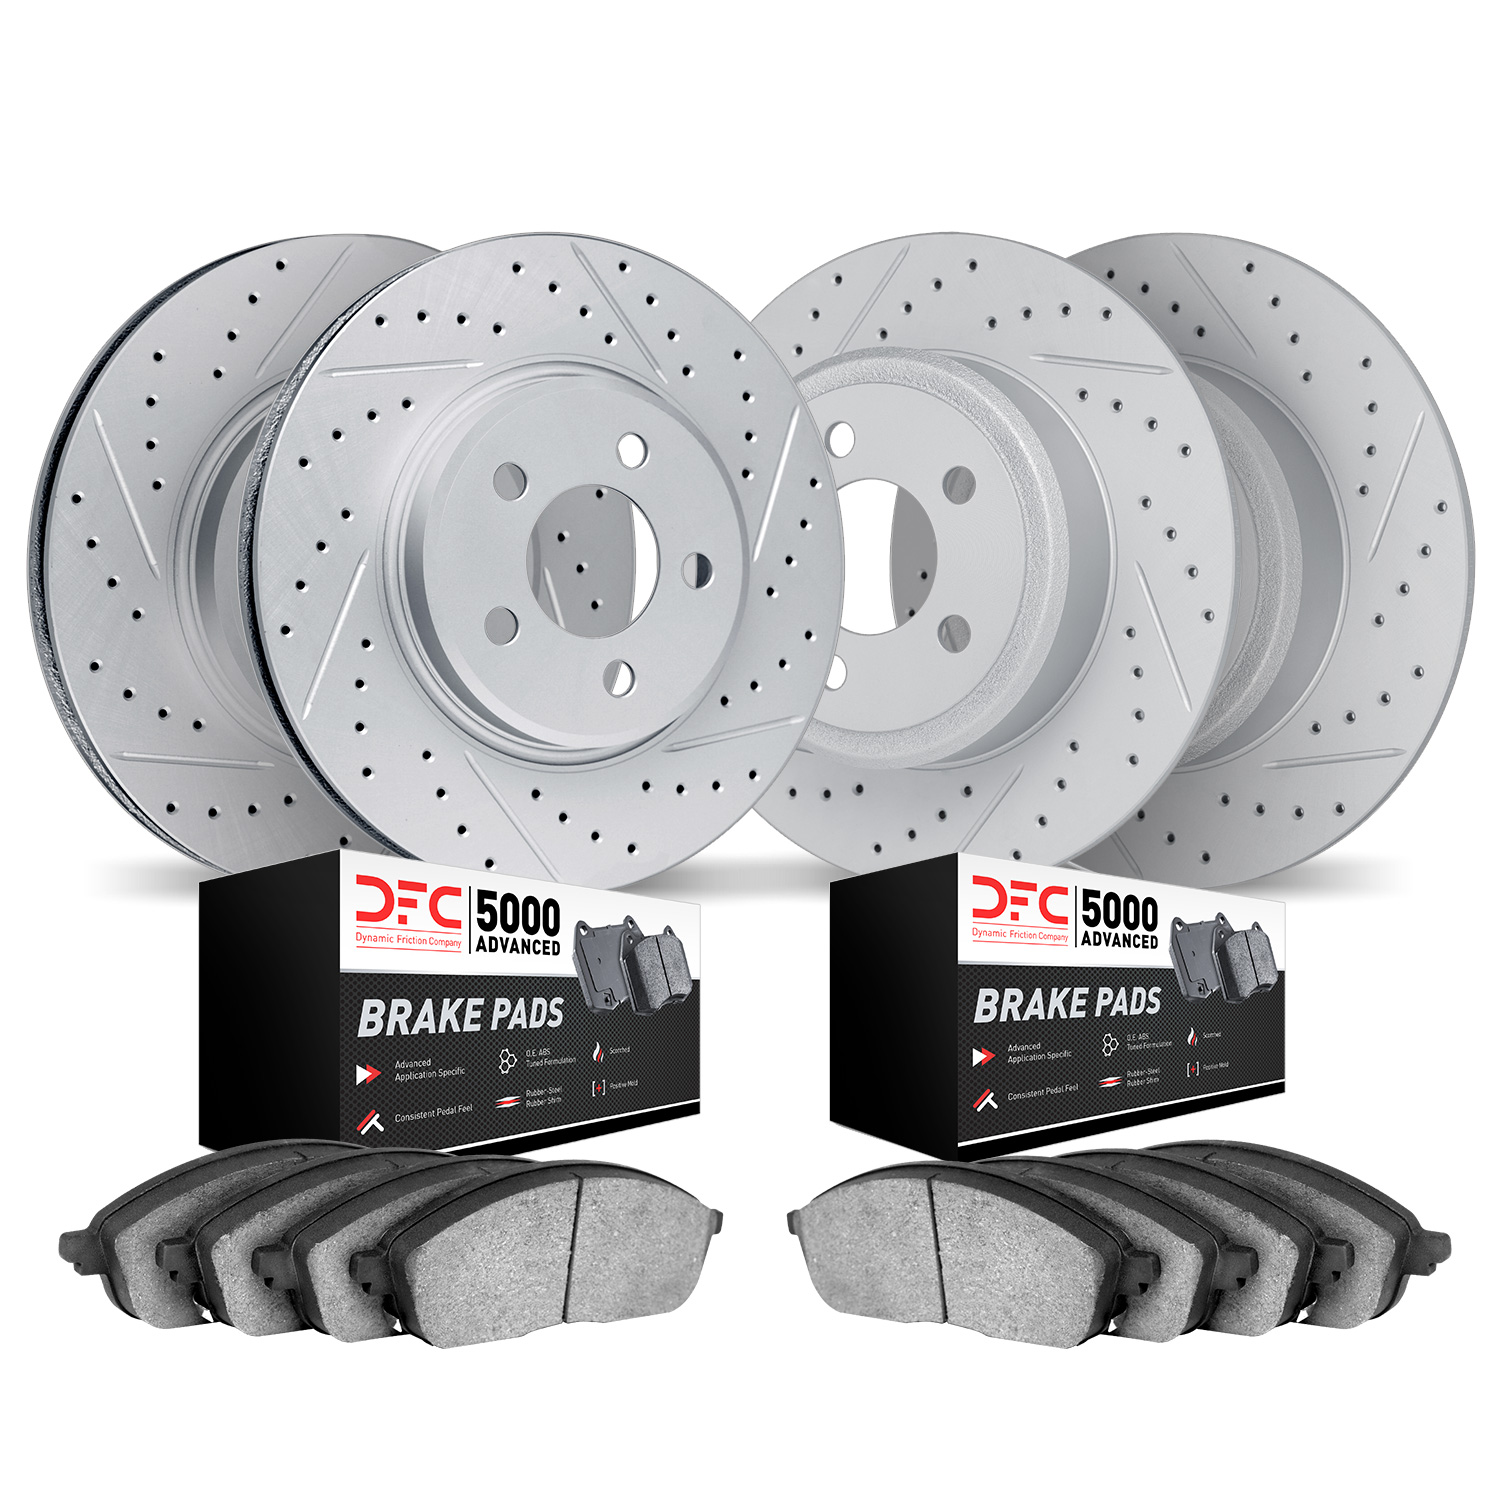 2504-72024 Geoperformance Drilled/Slotted Rotors w/5000 Advanced Brake Pads Kit, 2004-2012 Mitsubishi, Position: Front and Rear